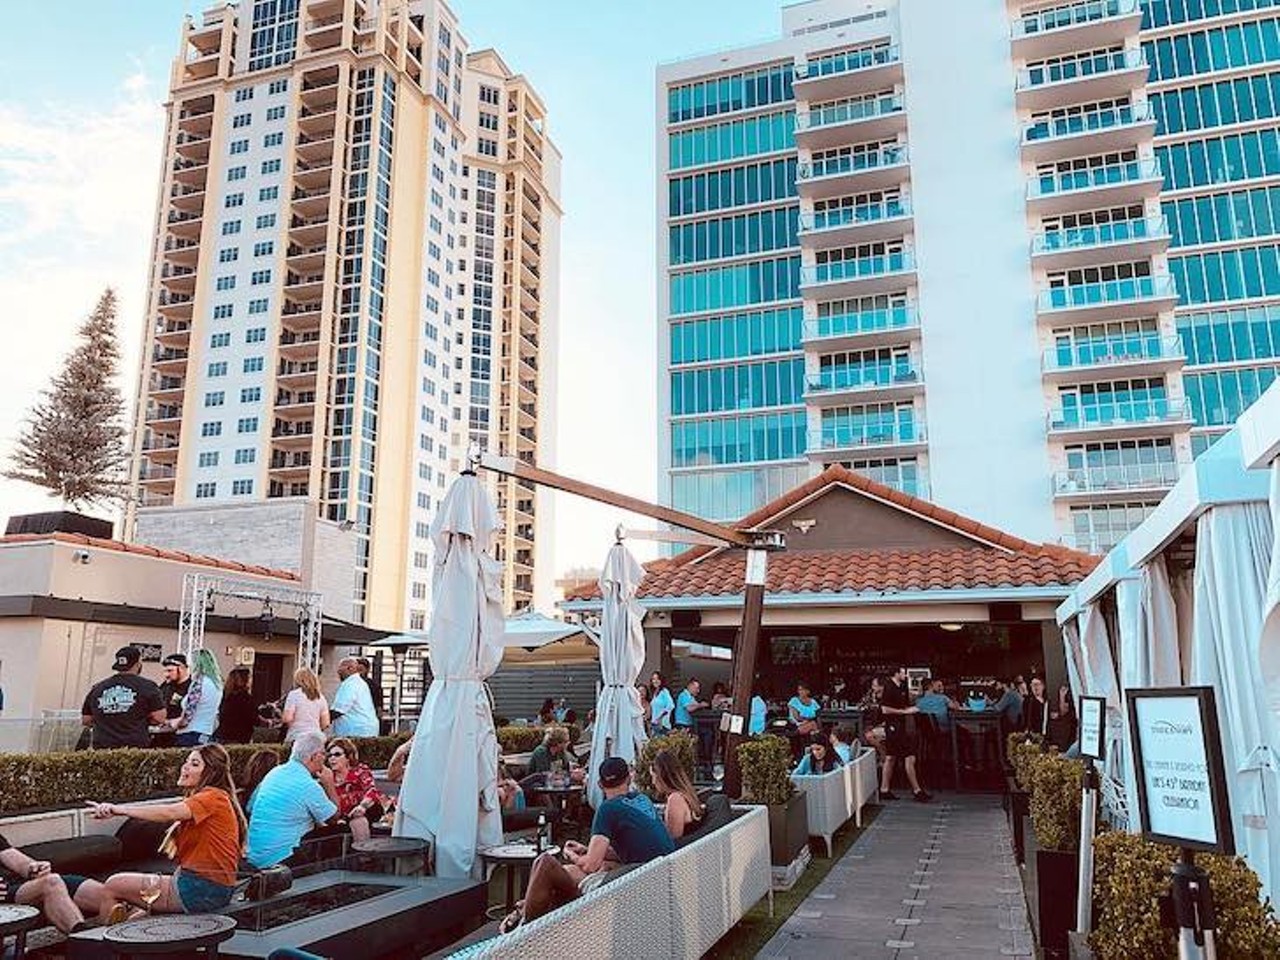 The Canopy  
340 Beach Dr. NE, St. Pete, 727-896-1080
The Canopy Rooftop Lounge is perched atop The Birchwood in the heart of St. Petersburg&#146;s waterfront. Experience St. Pete four stories higher than normal!
Photo via The Canopy/Facebook